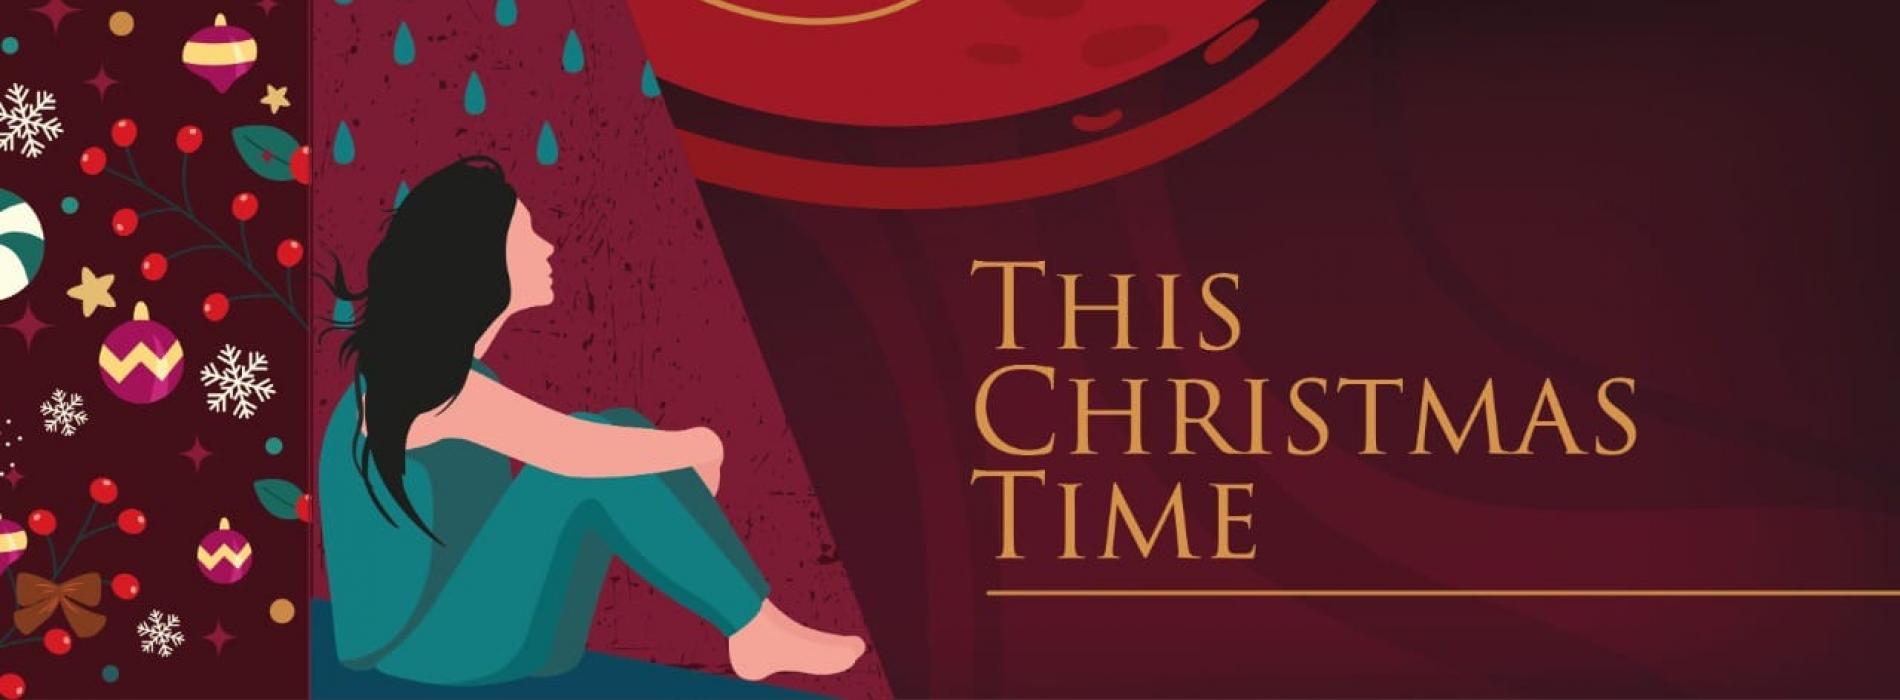 New Music : This Christmas Time – Official Lyric Video – Shehara Liyanage